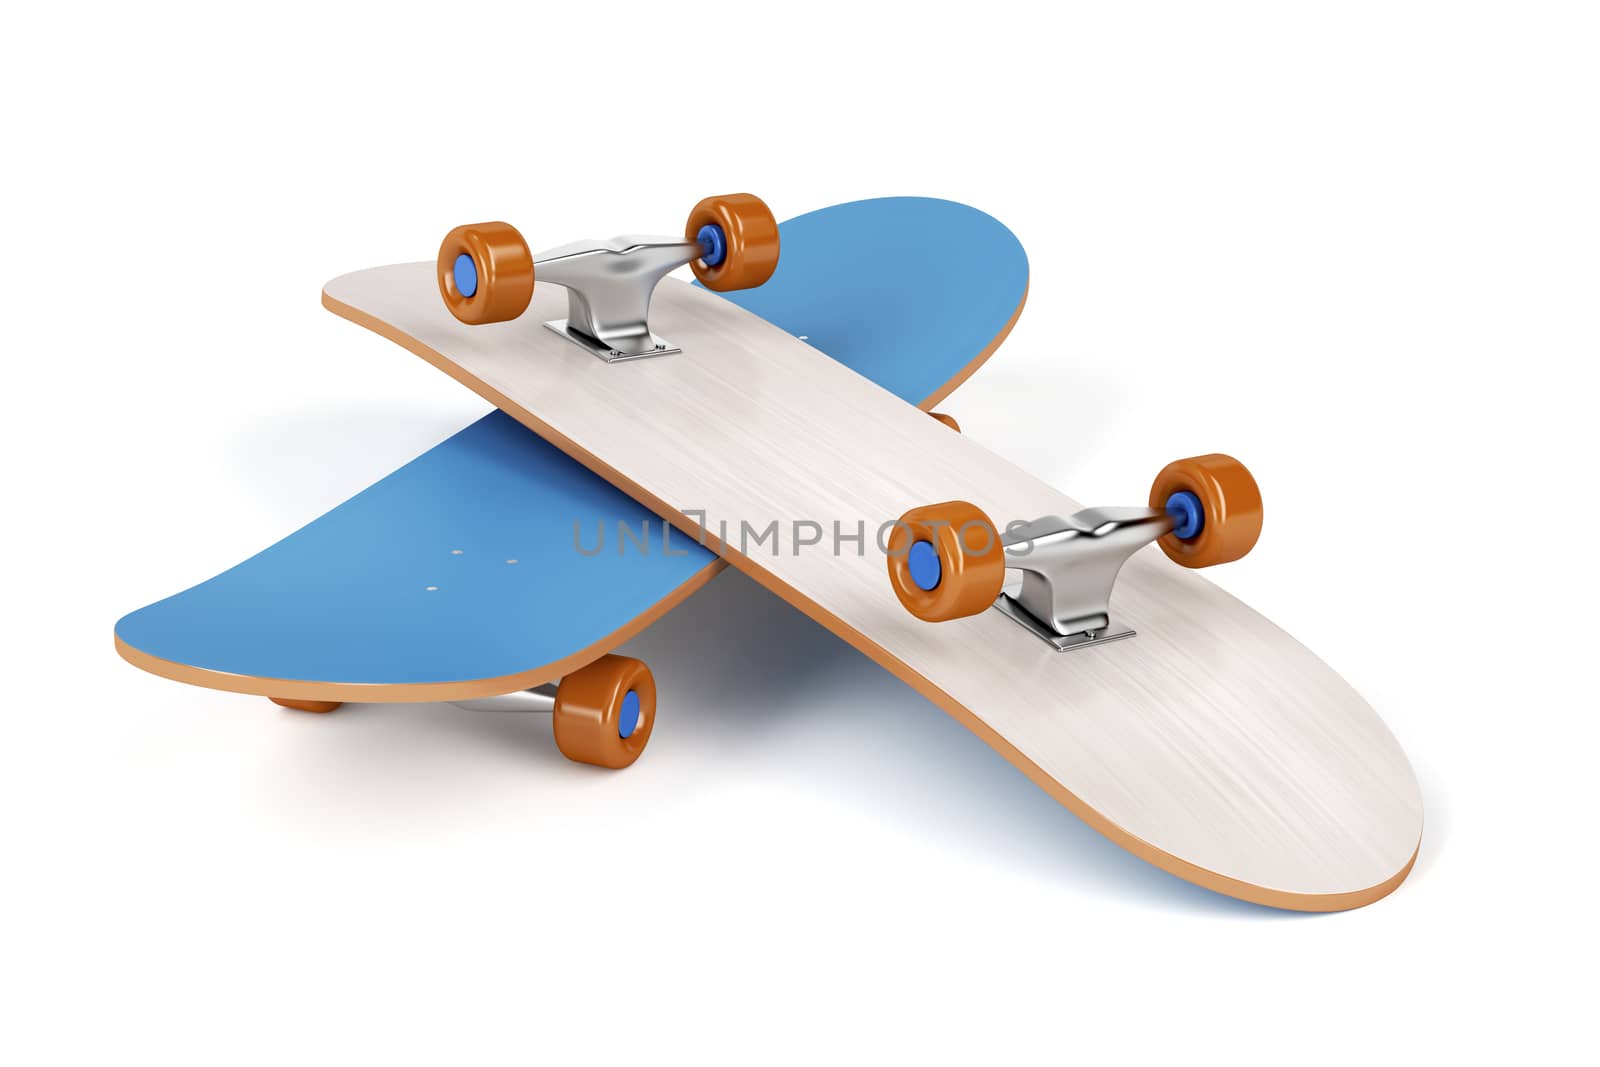 Skateboards by magraphics